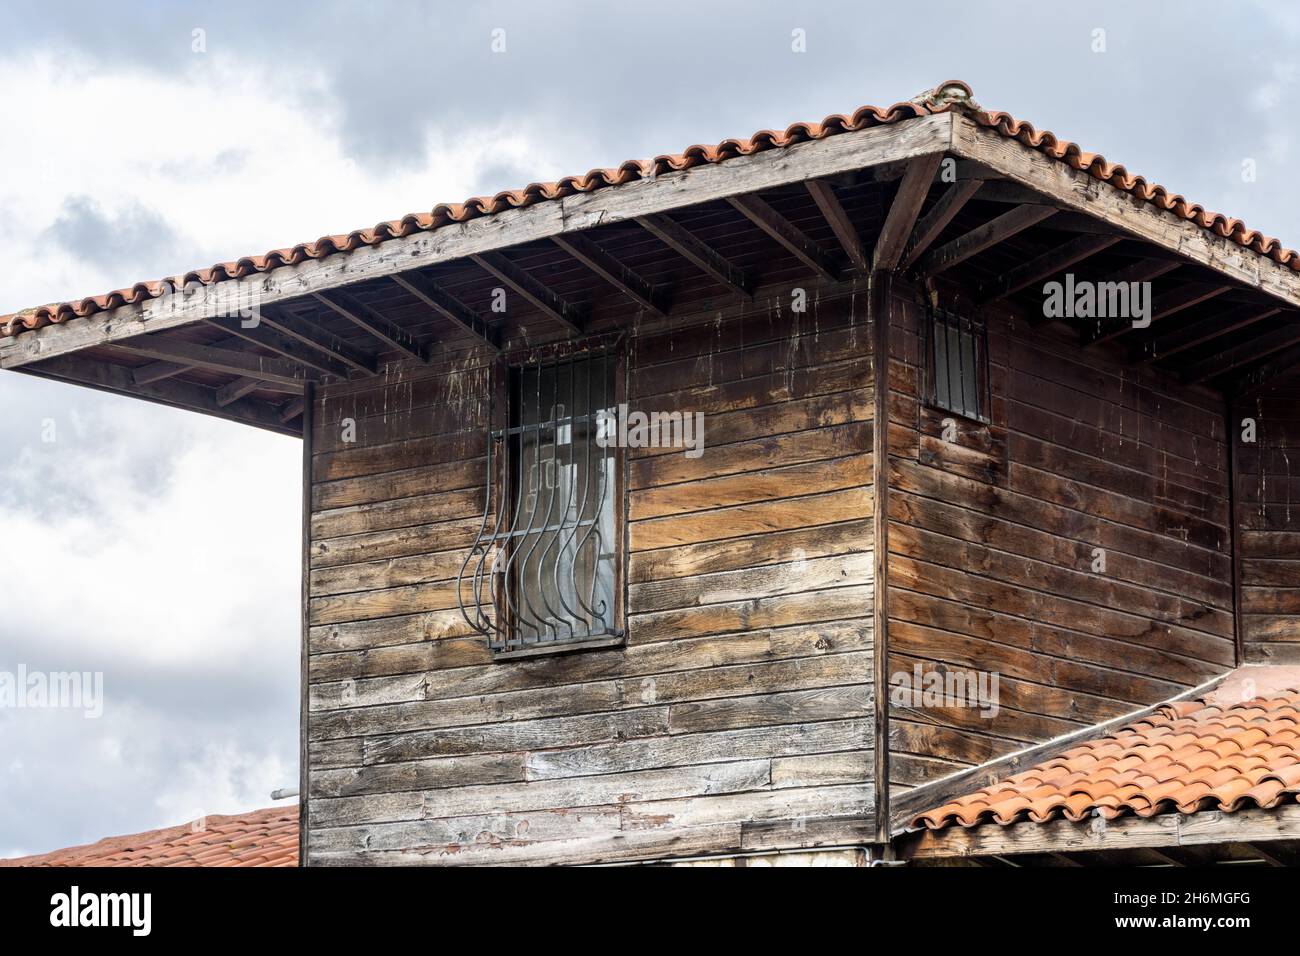 Roof of the old wooden house Stock Photo